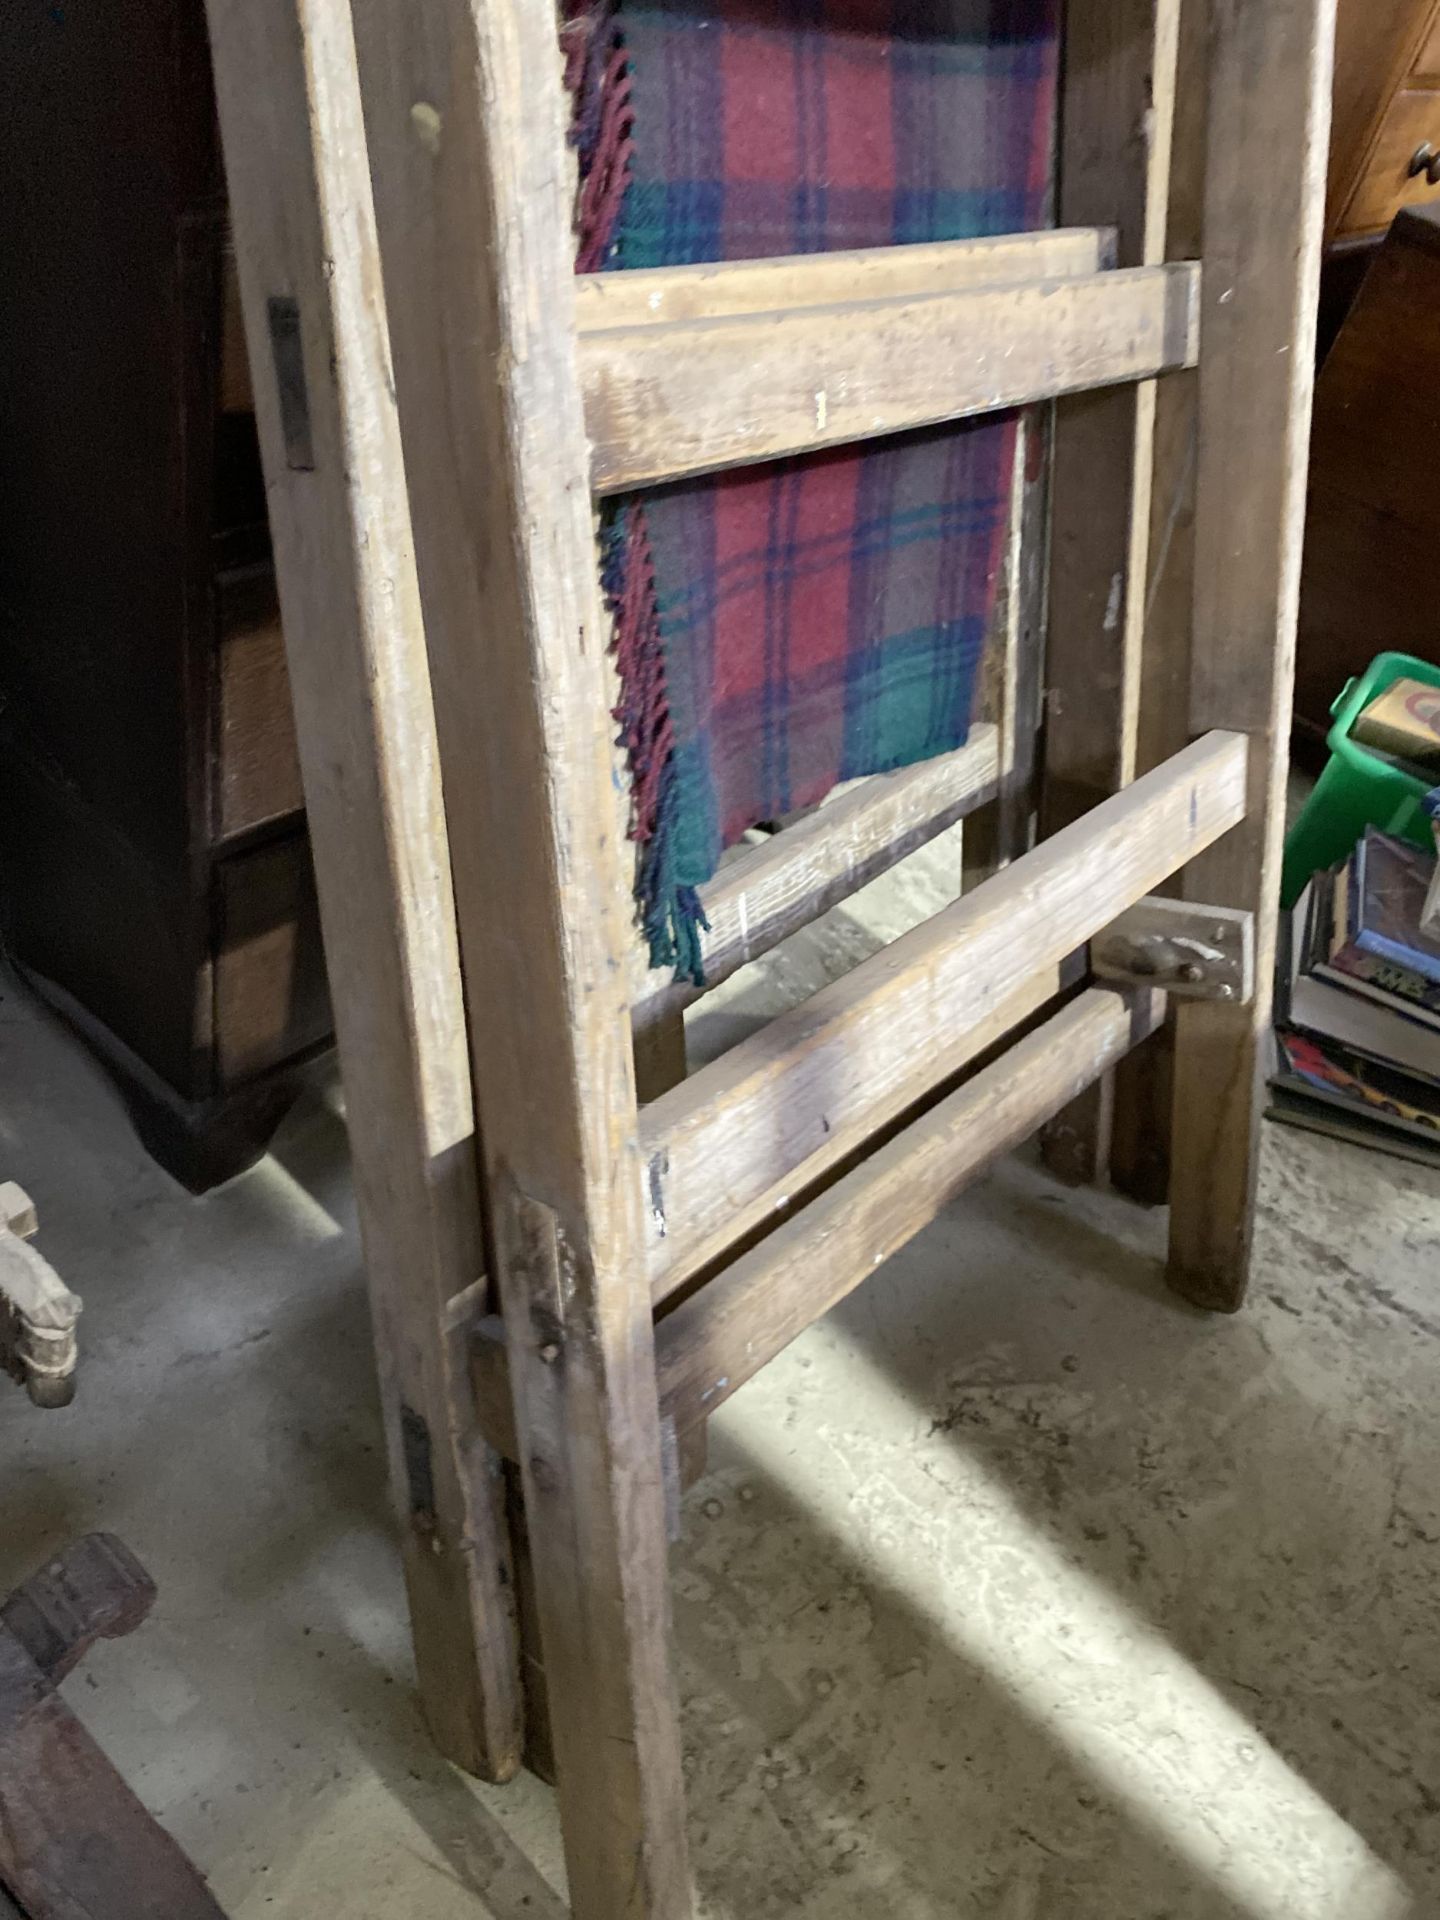 TWO VINTAGE WOODEN FOLDING STANDS - Image 3 of 3